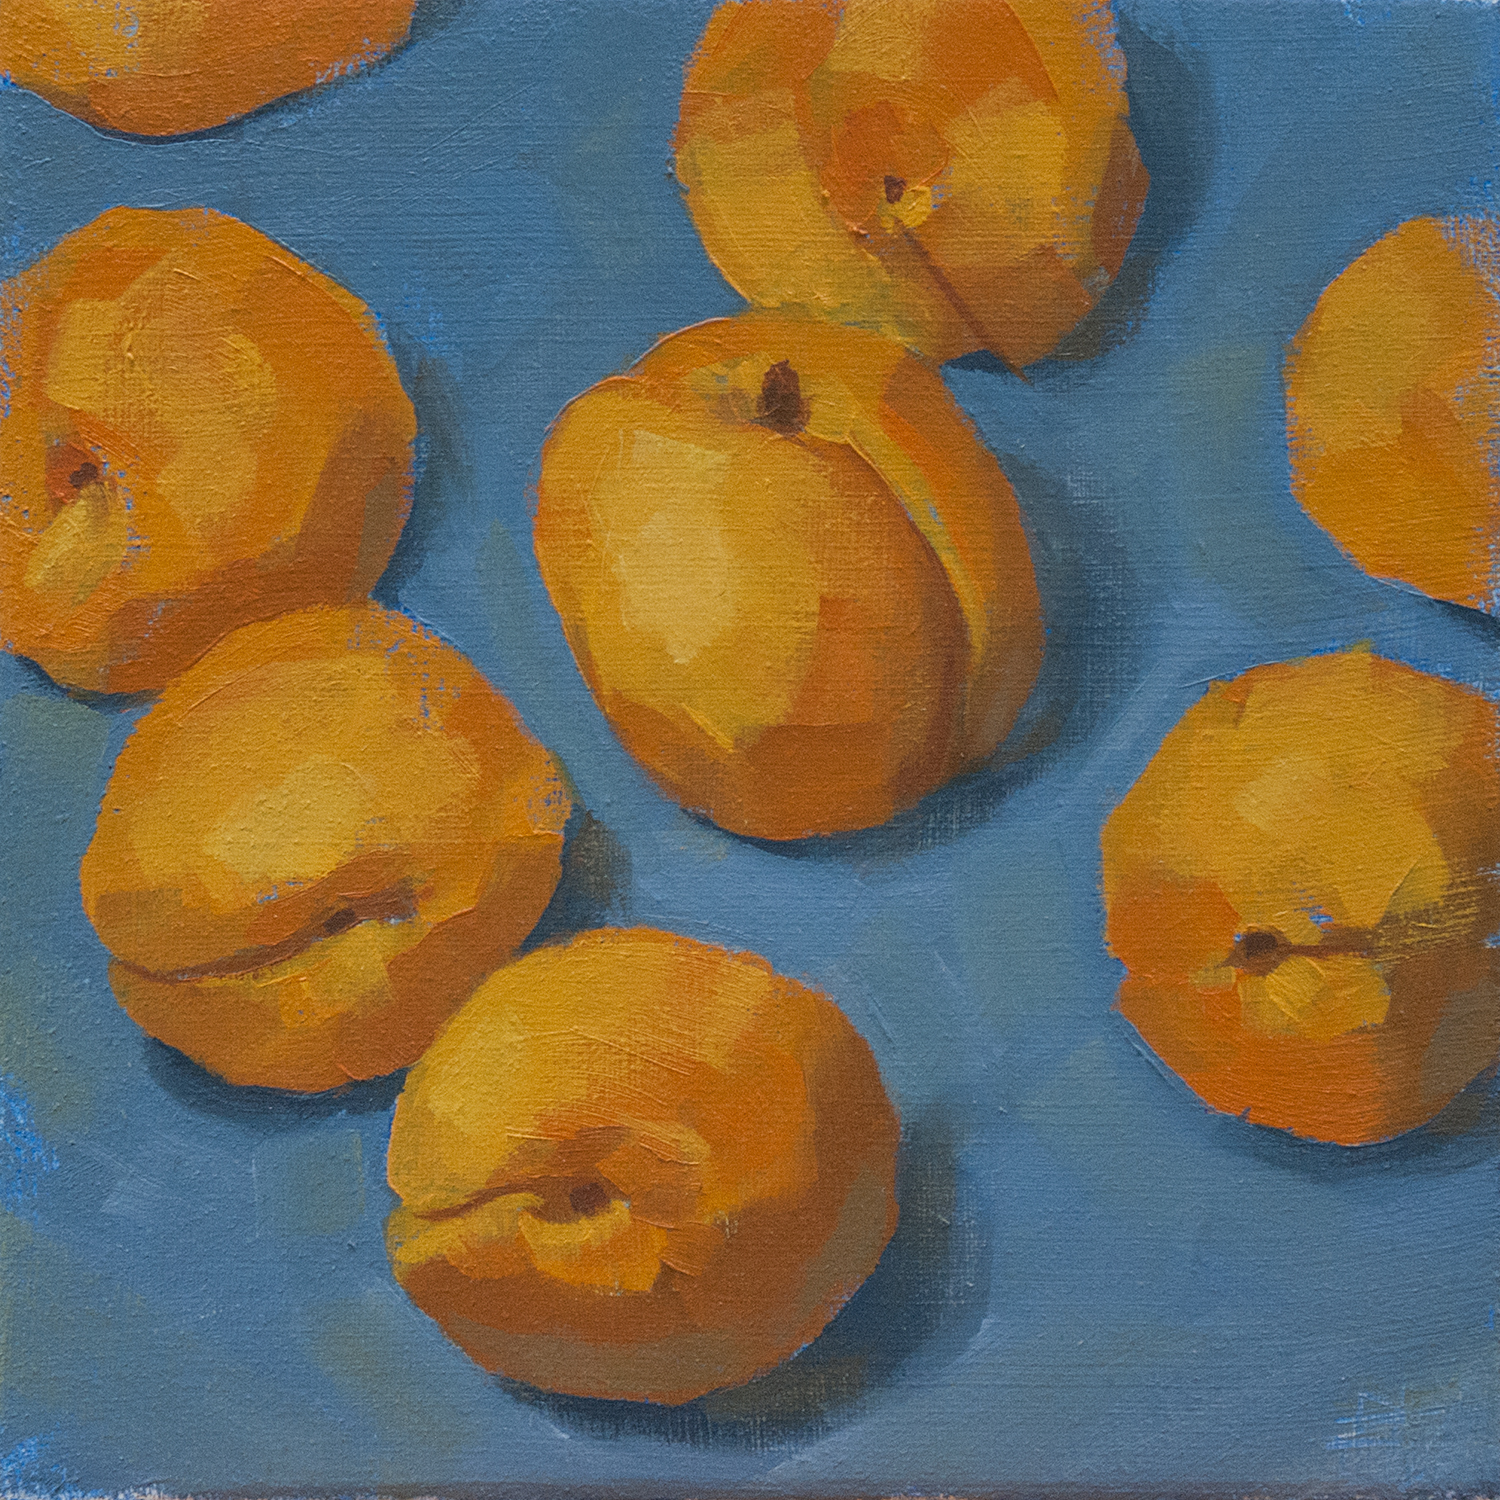 Incubating Apricots by Rob Lunn